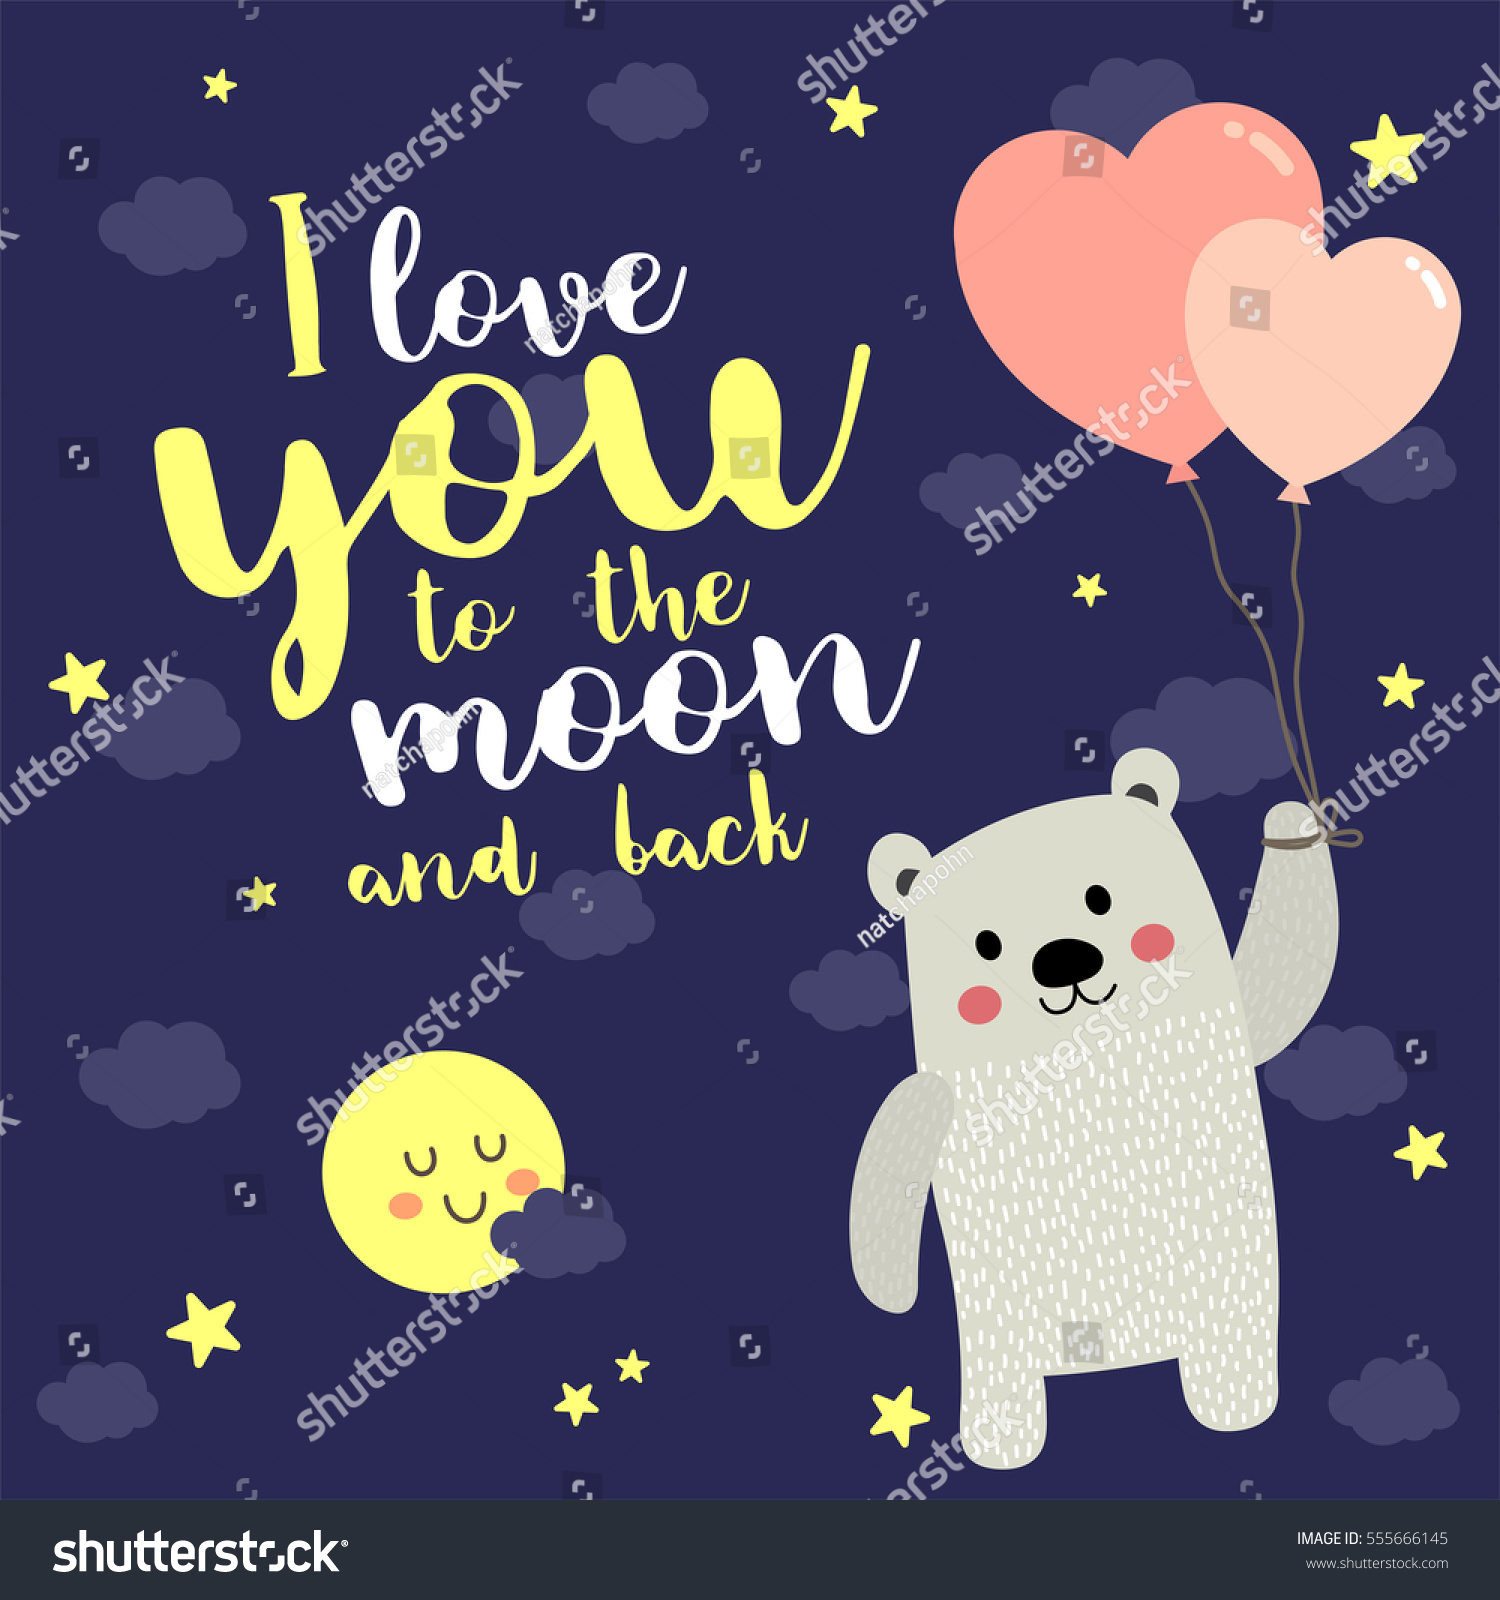 I Love You To The Moon And Back quote with cute Polar bear floating in the